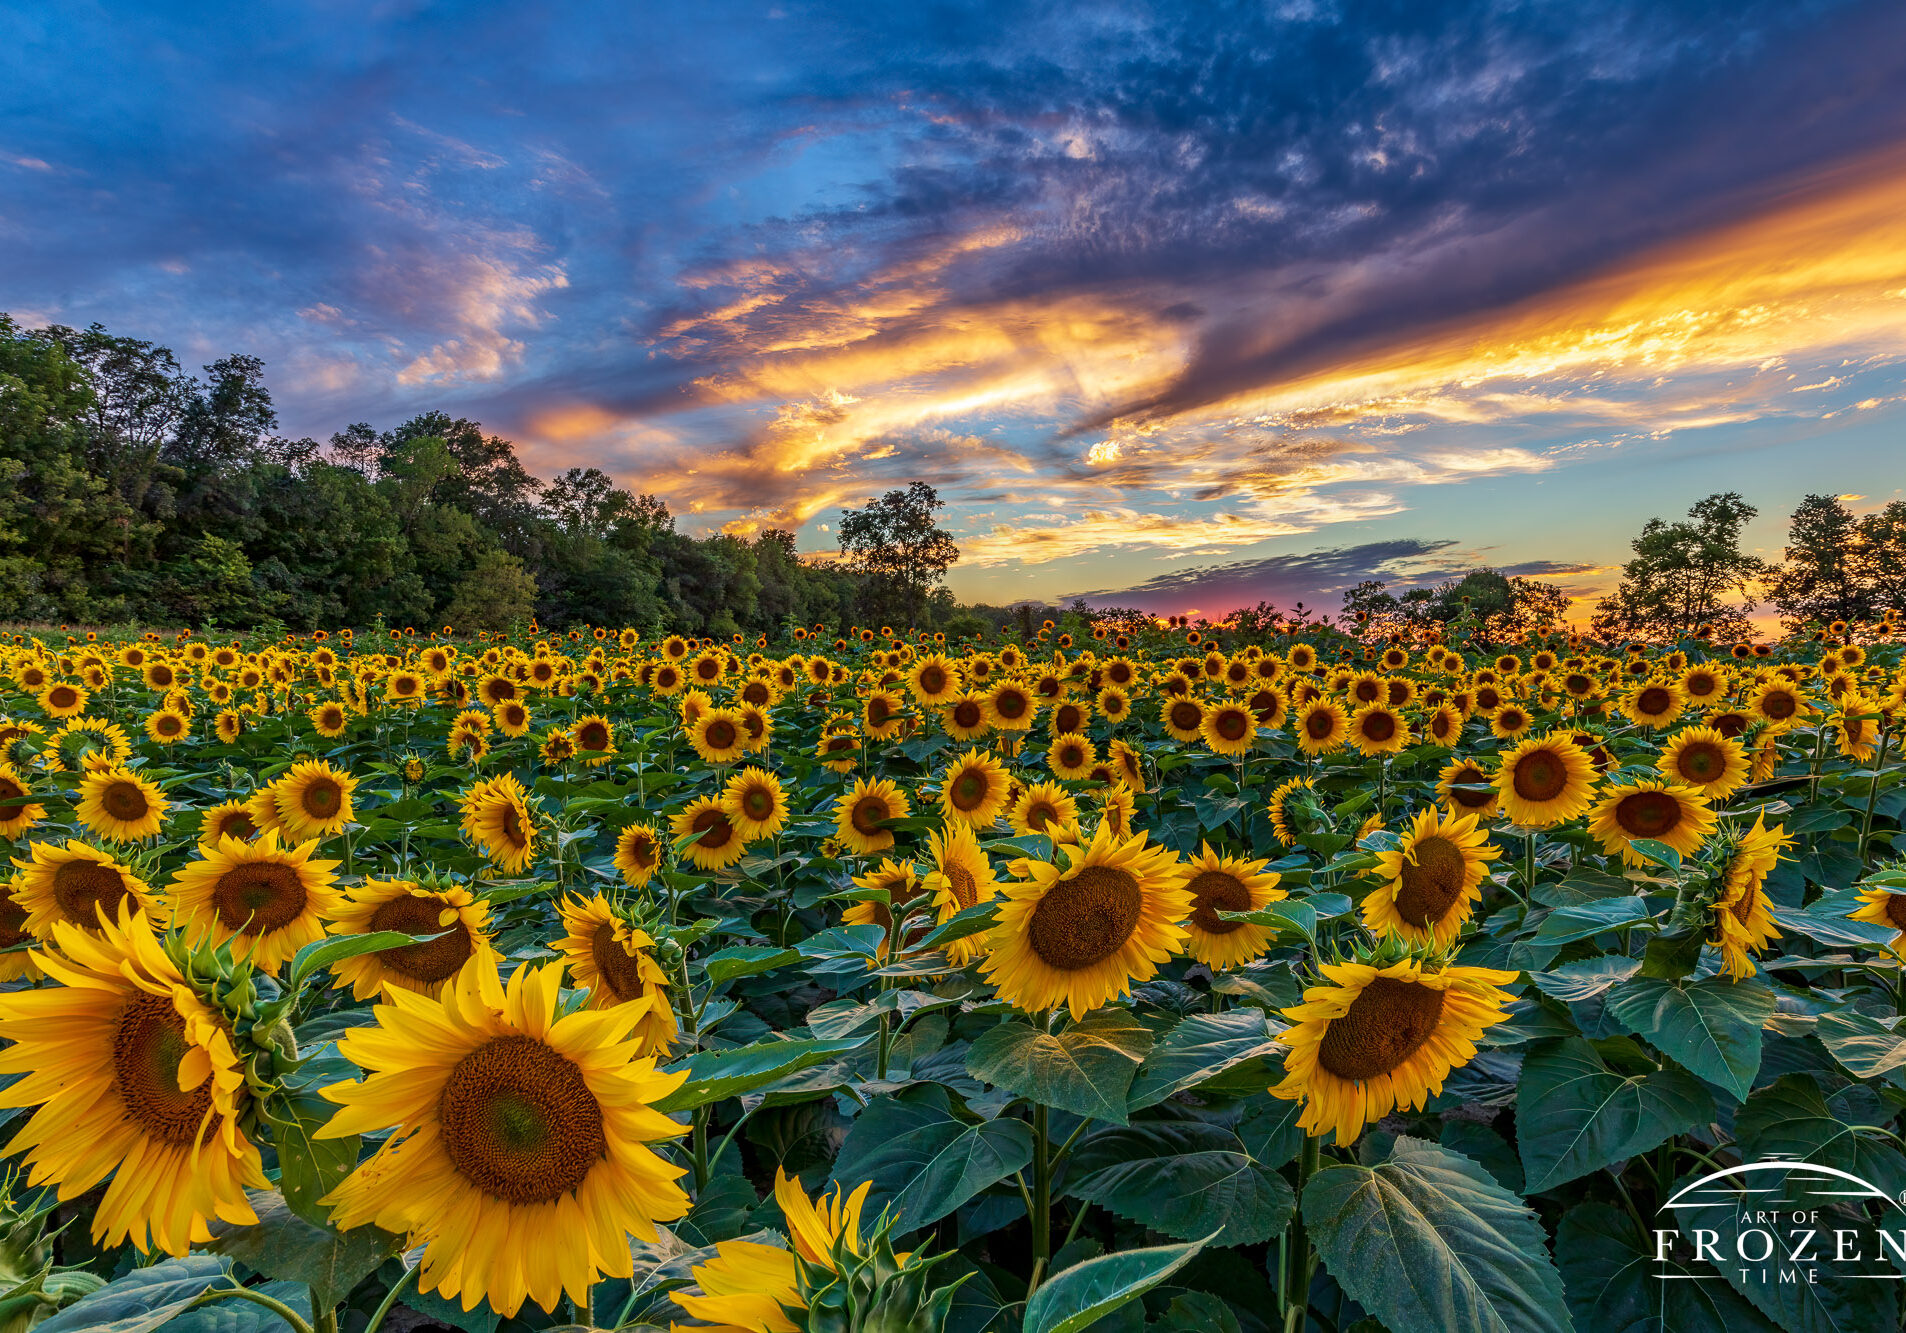 A sunflower field at twilight where a gentle camera flash warmly illuminated the flowers that contrast with the blues of the oncoming twilight skies